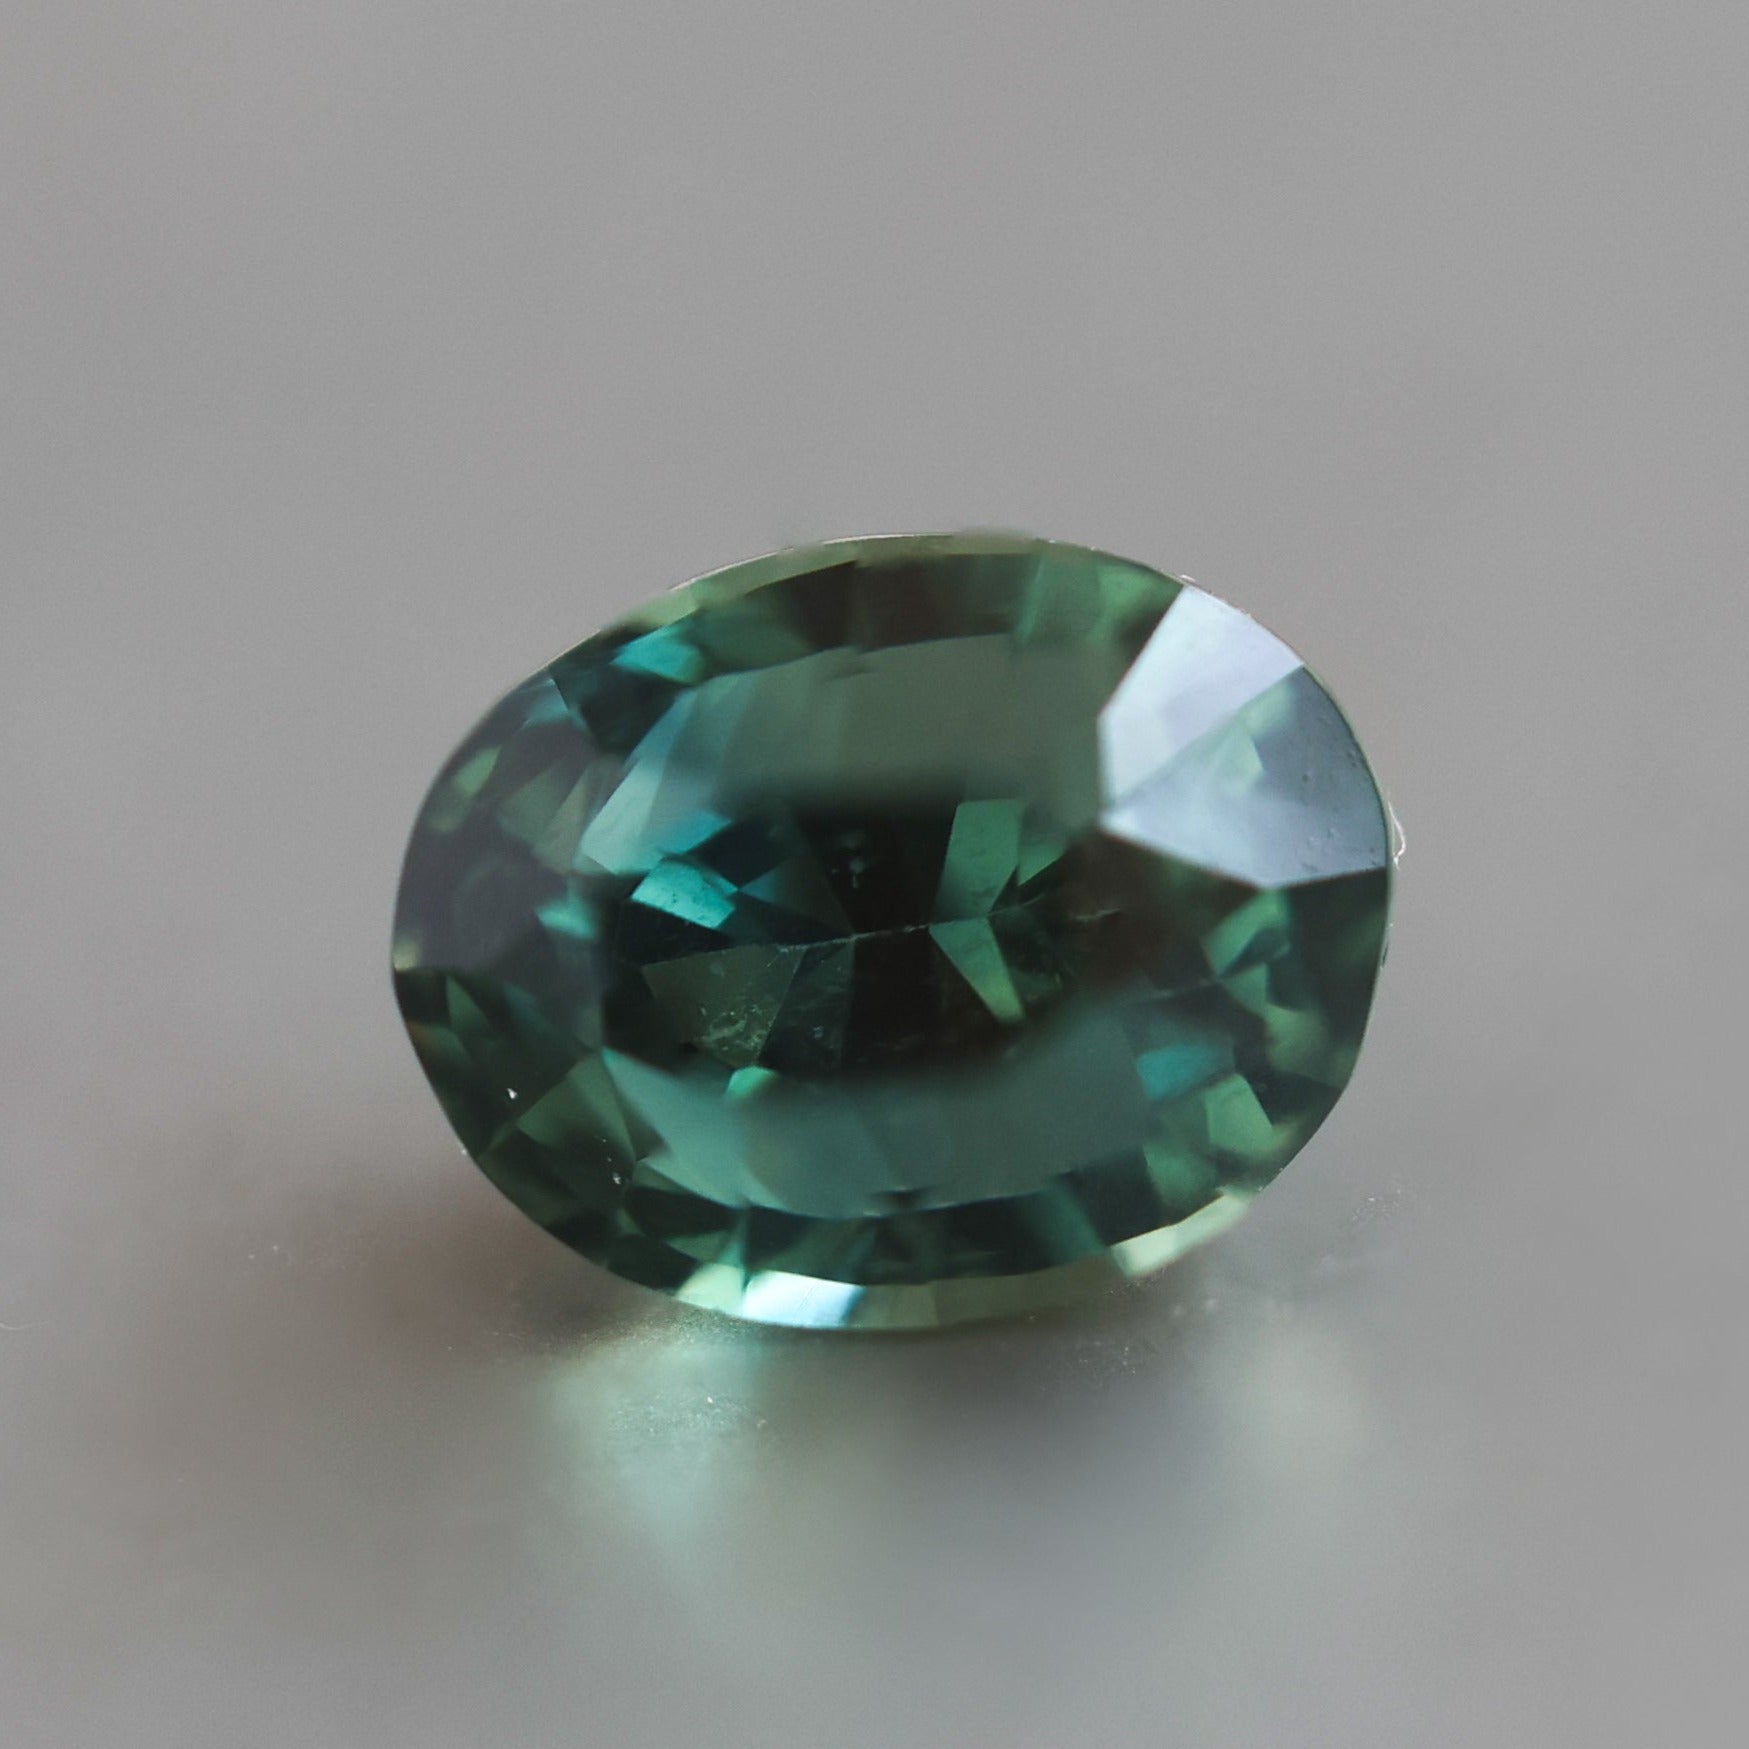 Loose 2 Ct Oval Teal Sapphire - setting 6